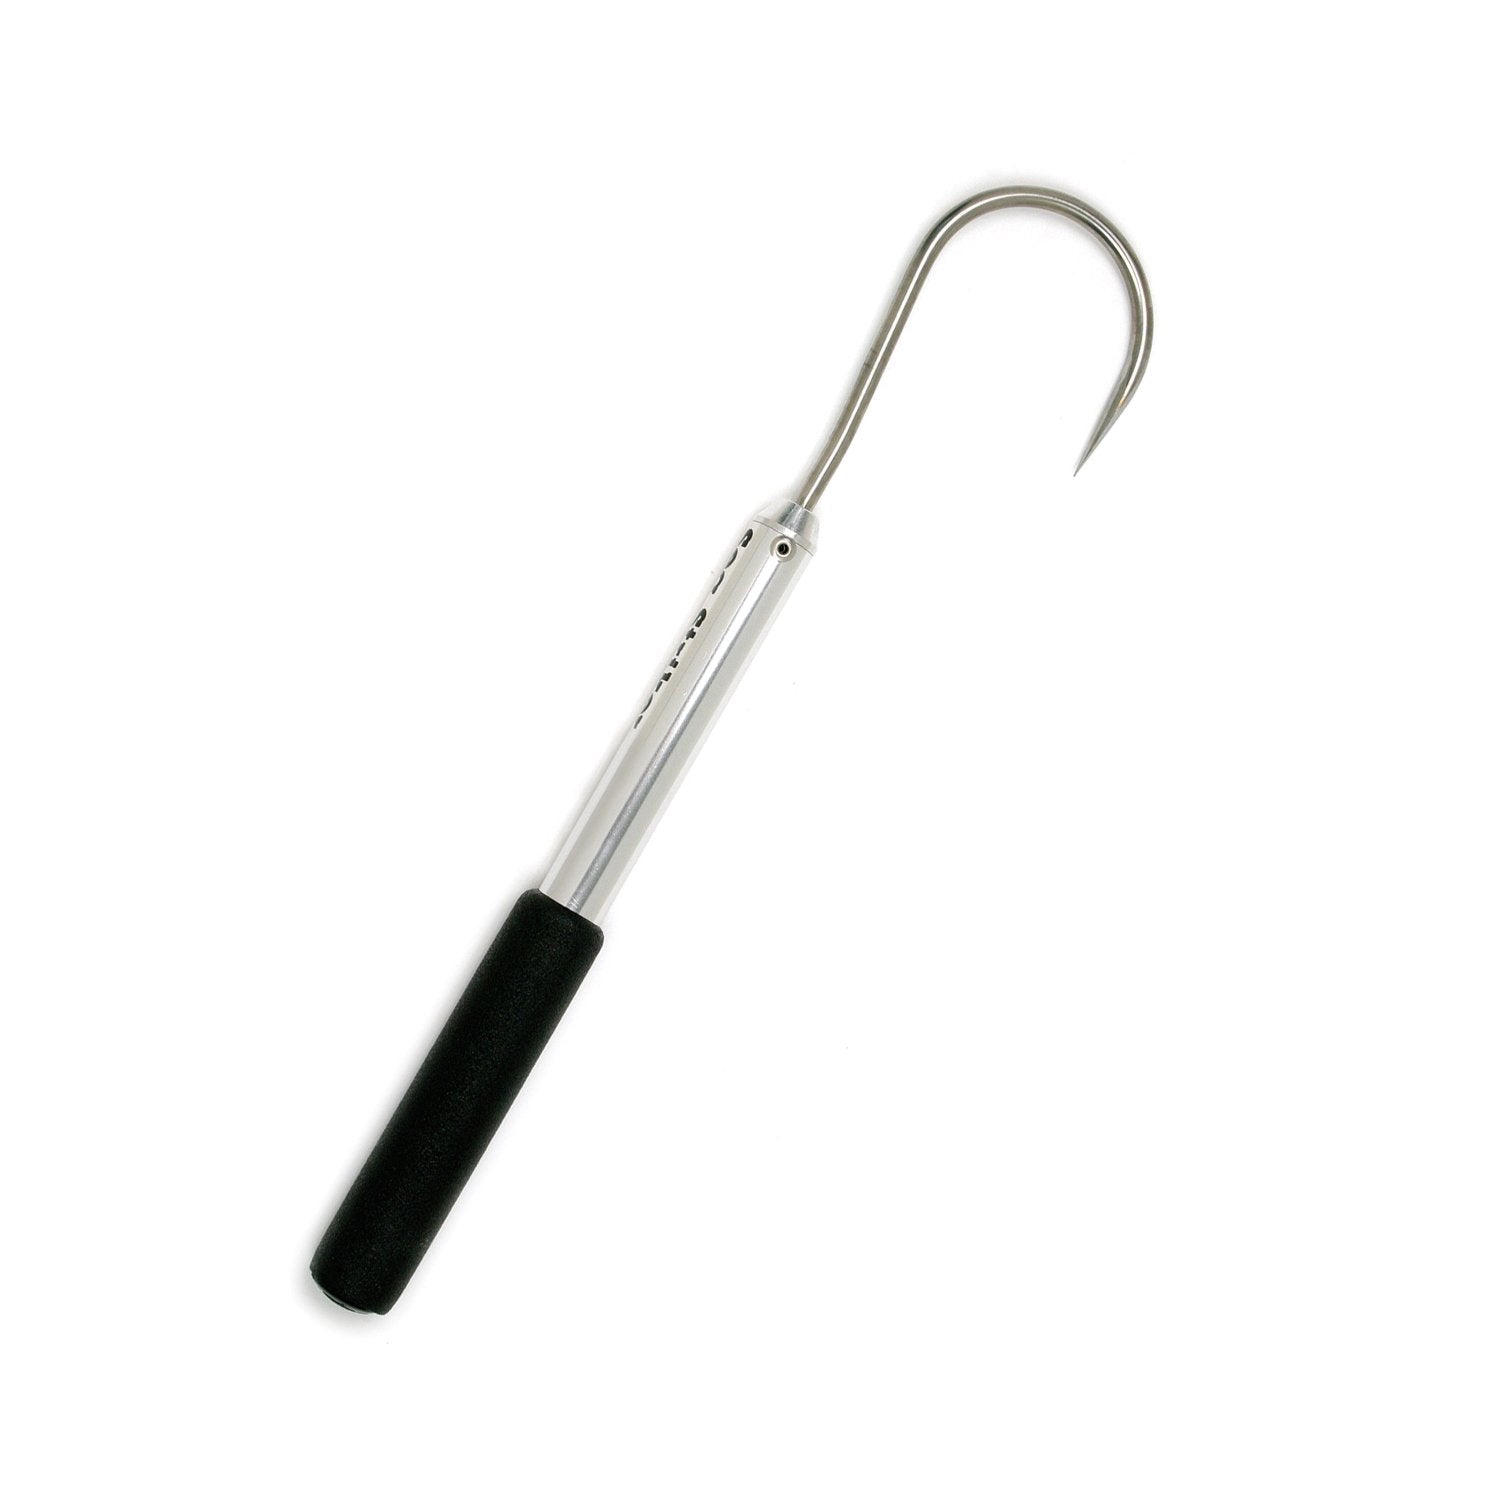 Gaff Head (Fish Hook) 8mm (All stainless steel)